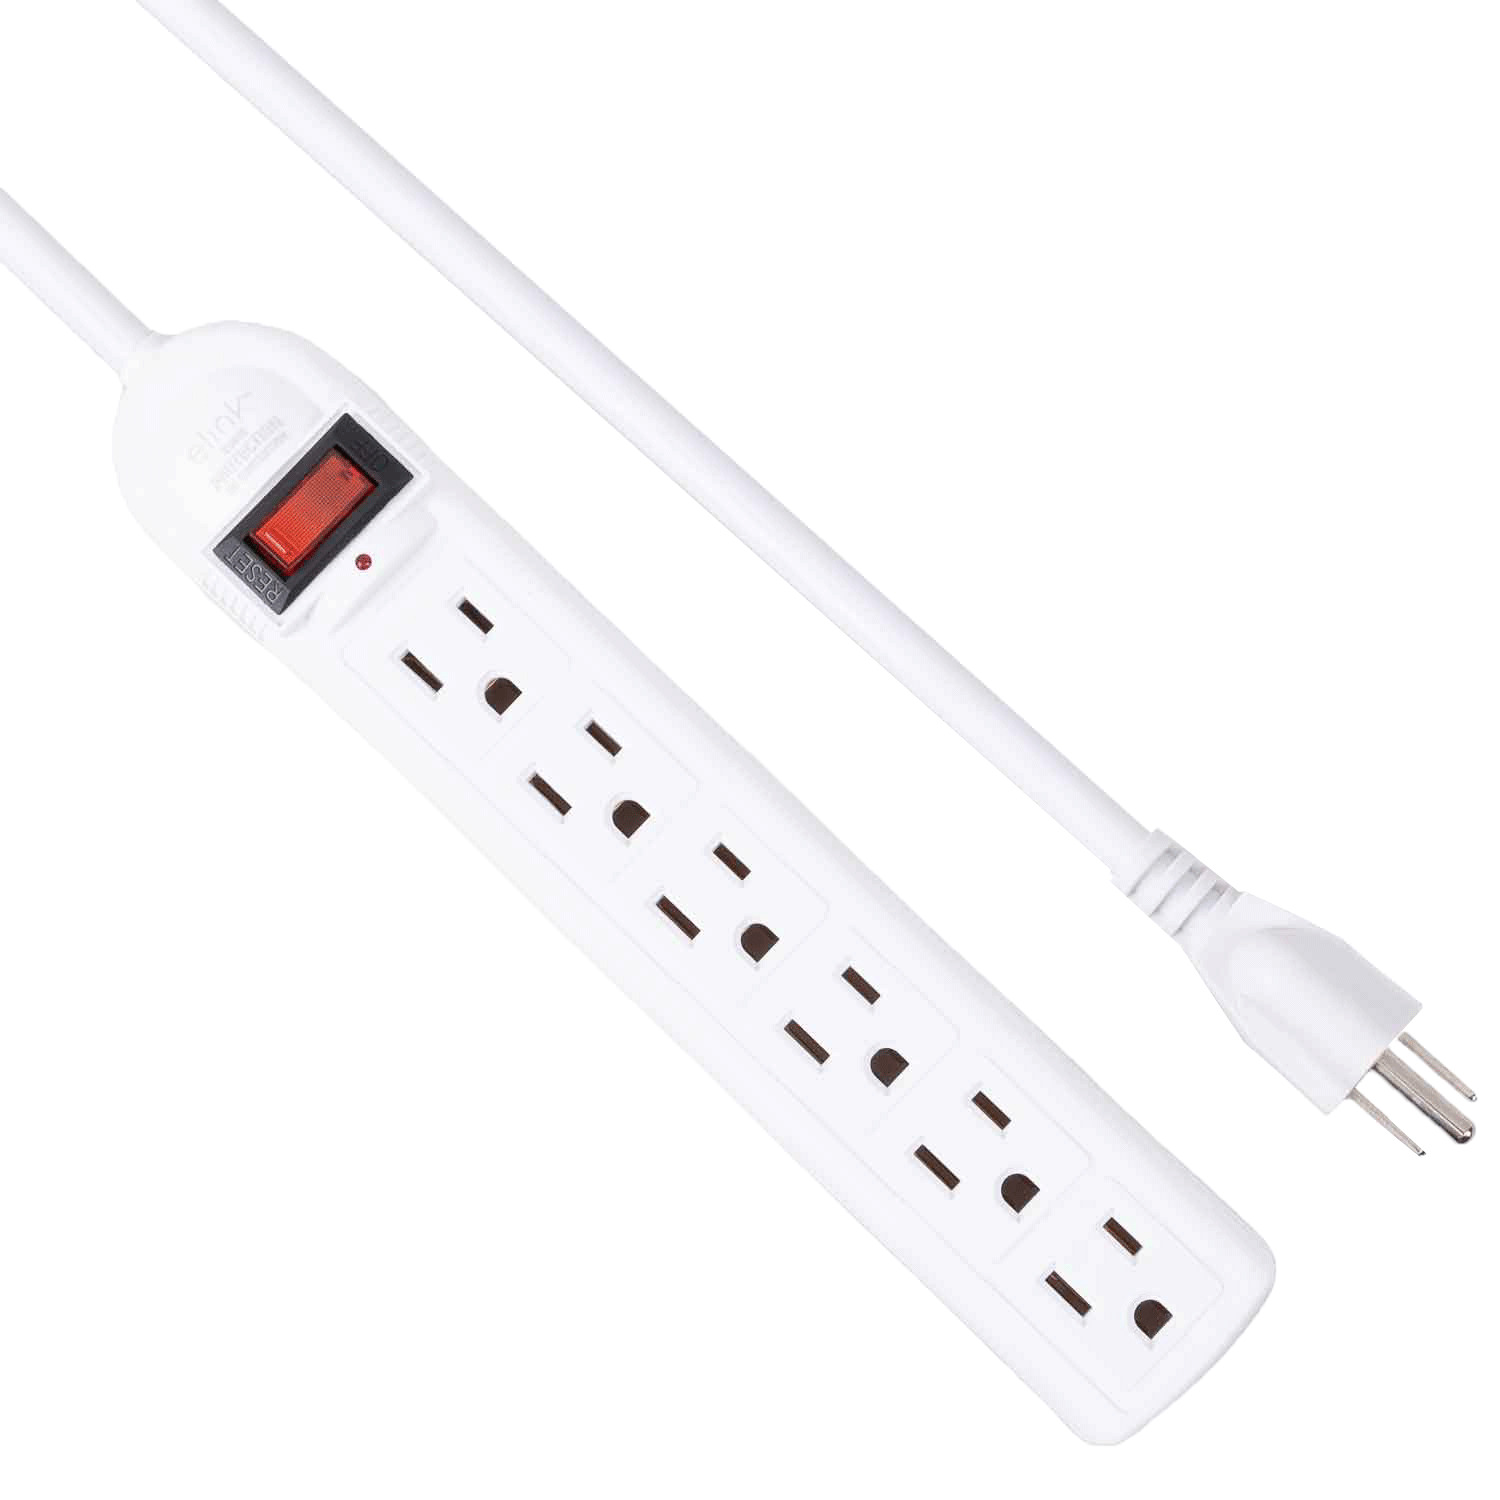 elink - Power bar with surge protection, 6 outlets, 4ft